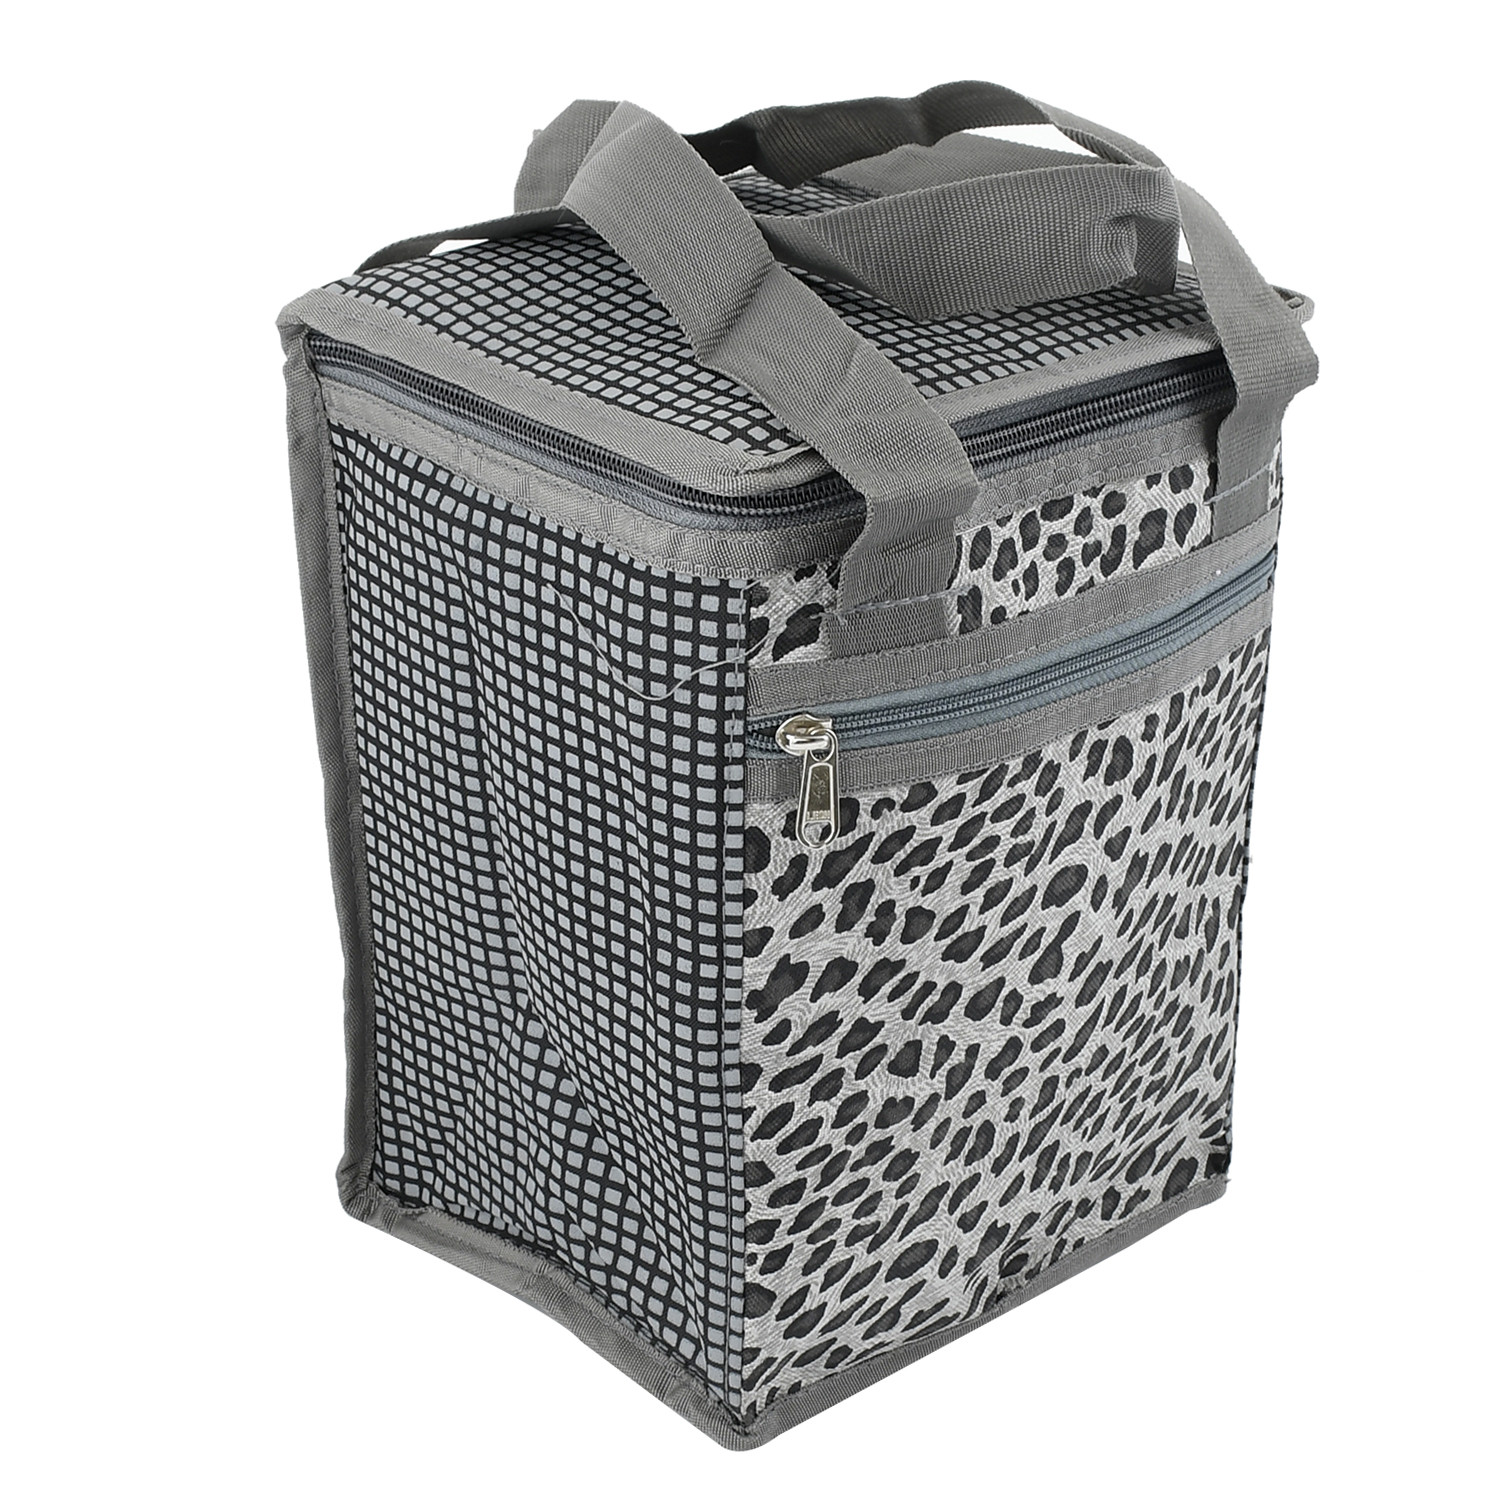 Kuber Industries Tiger Print Design  Canvas Waterproof Lunch Bag, Suitable for 3 Compartment (Grey)  -CTKTC38973